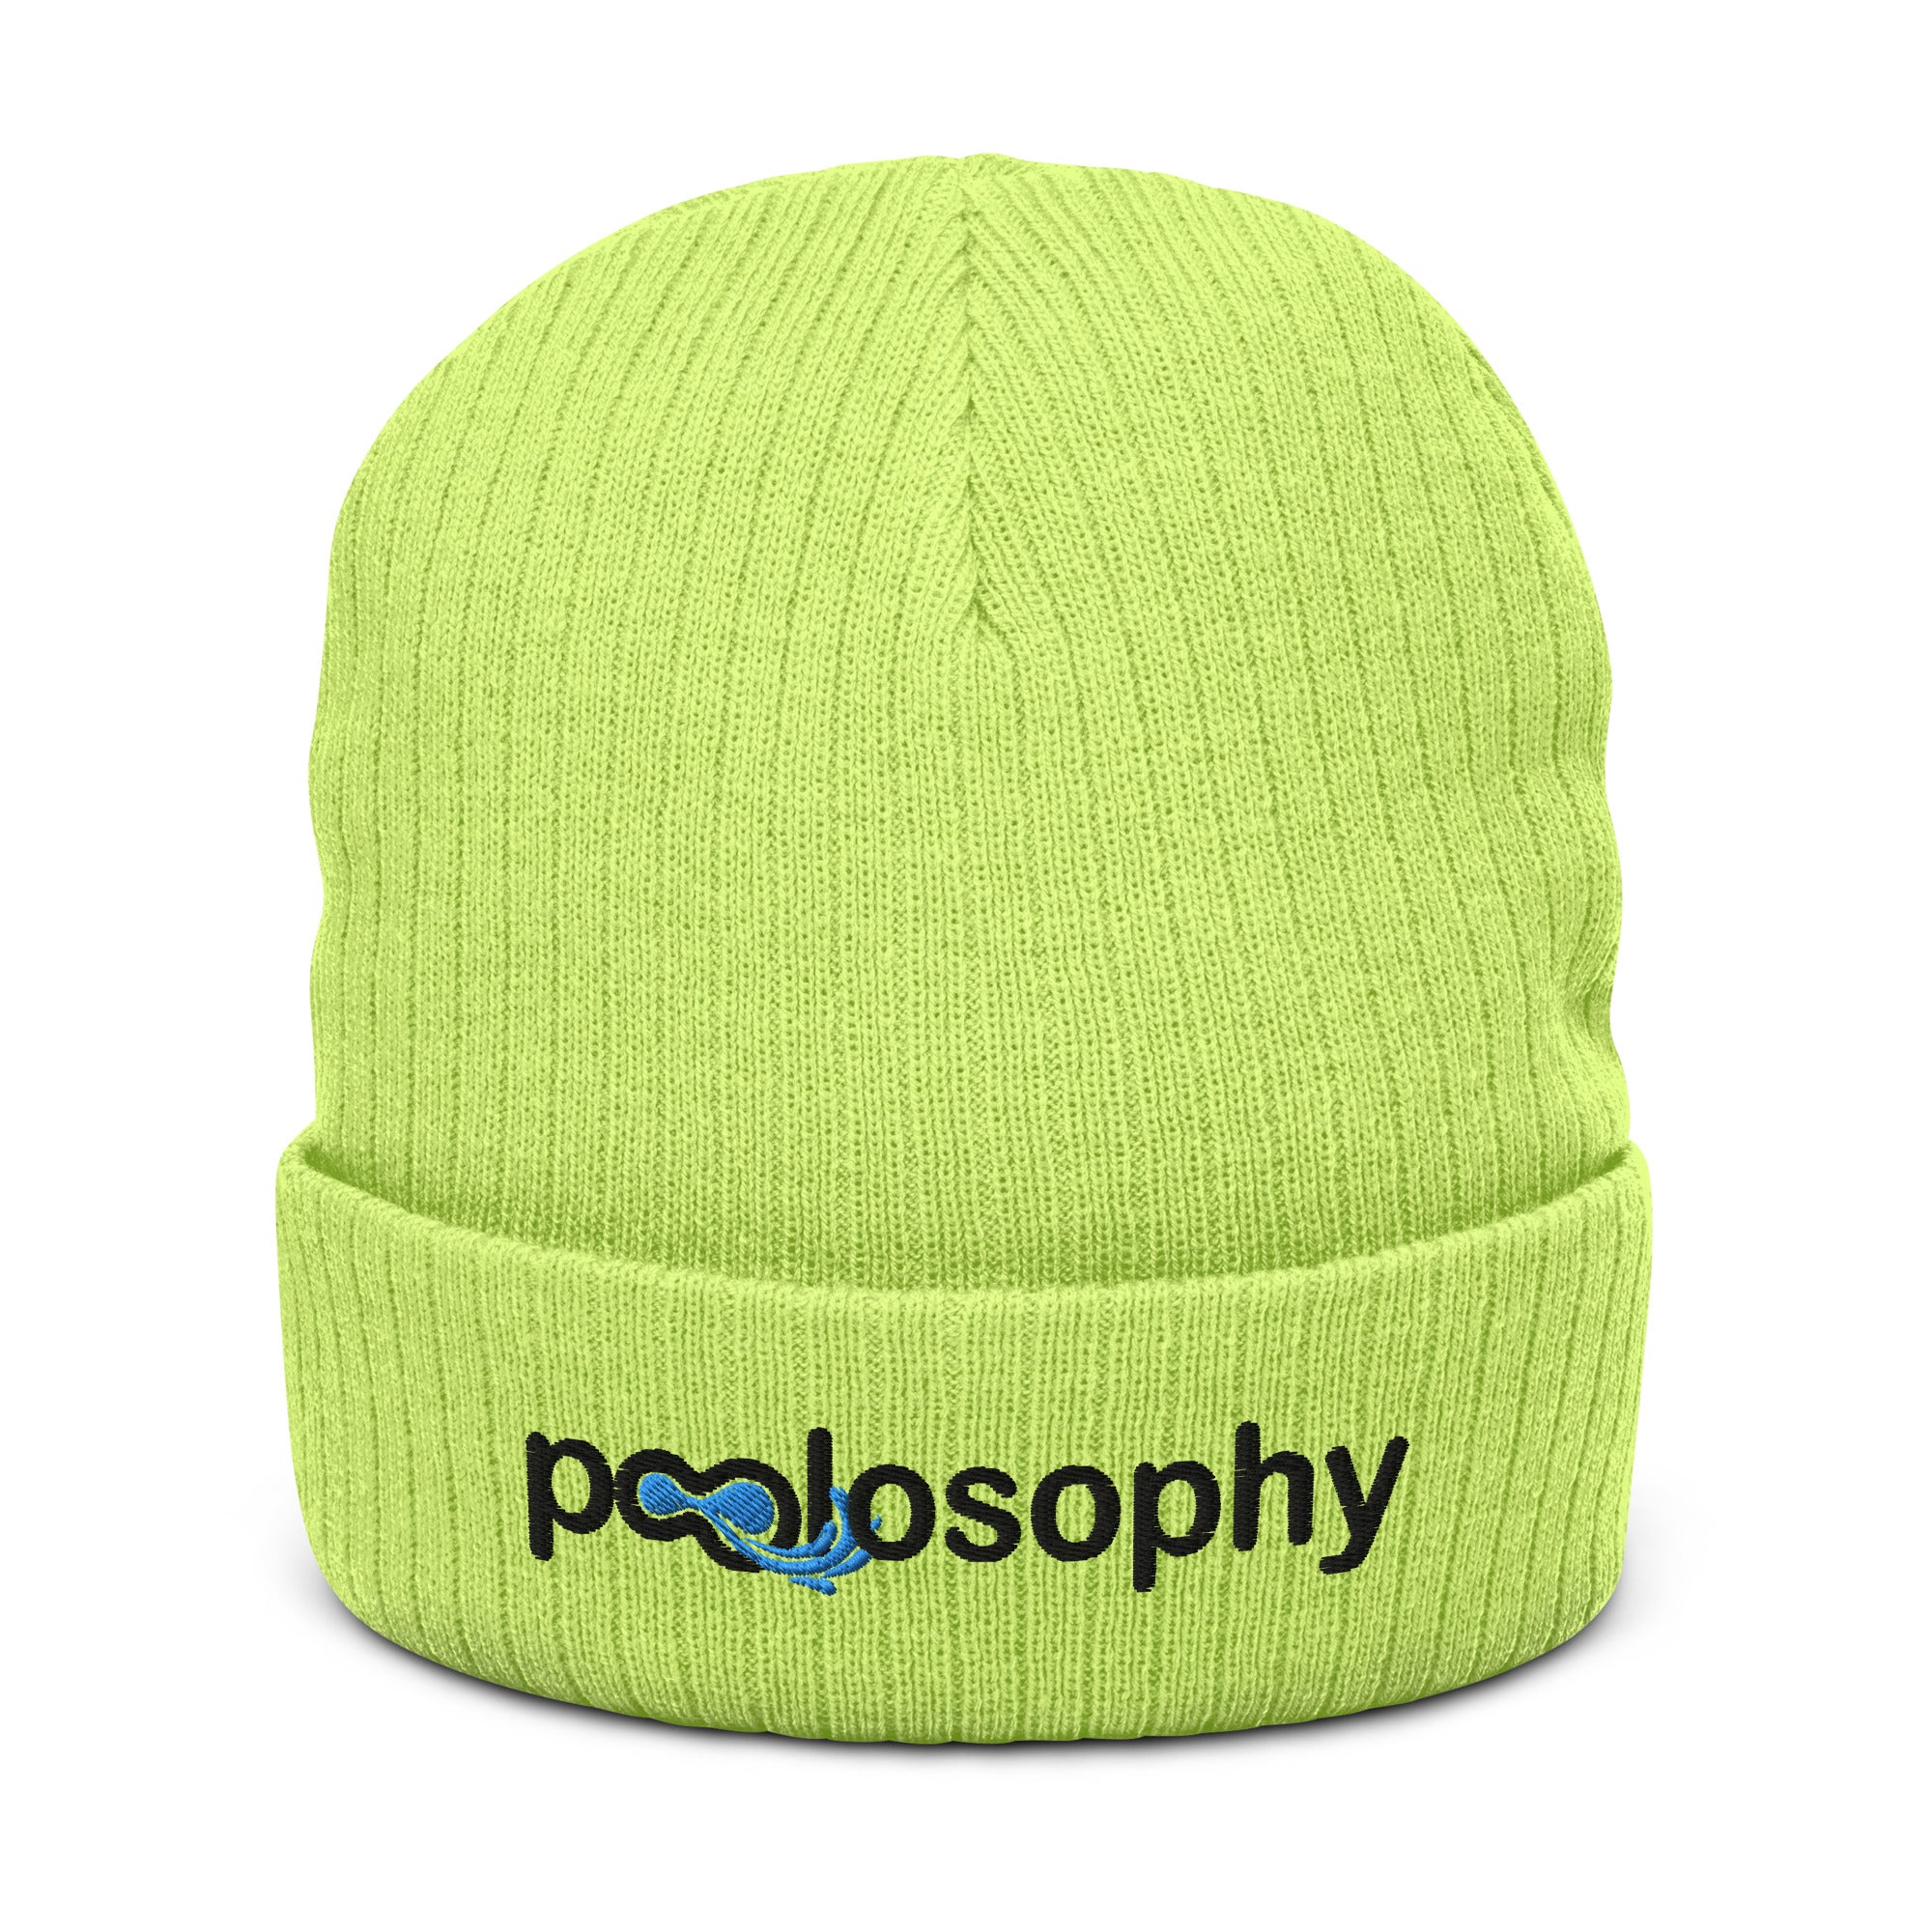 Poolosophy Ribbed Knit Beanie